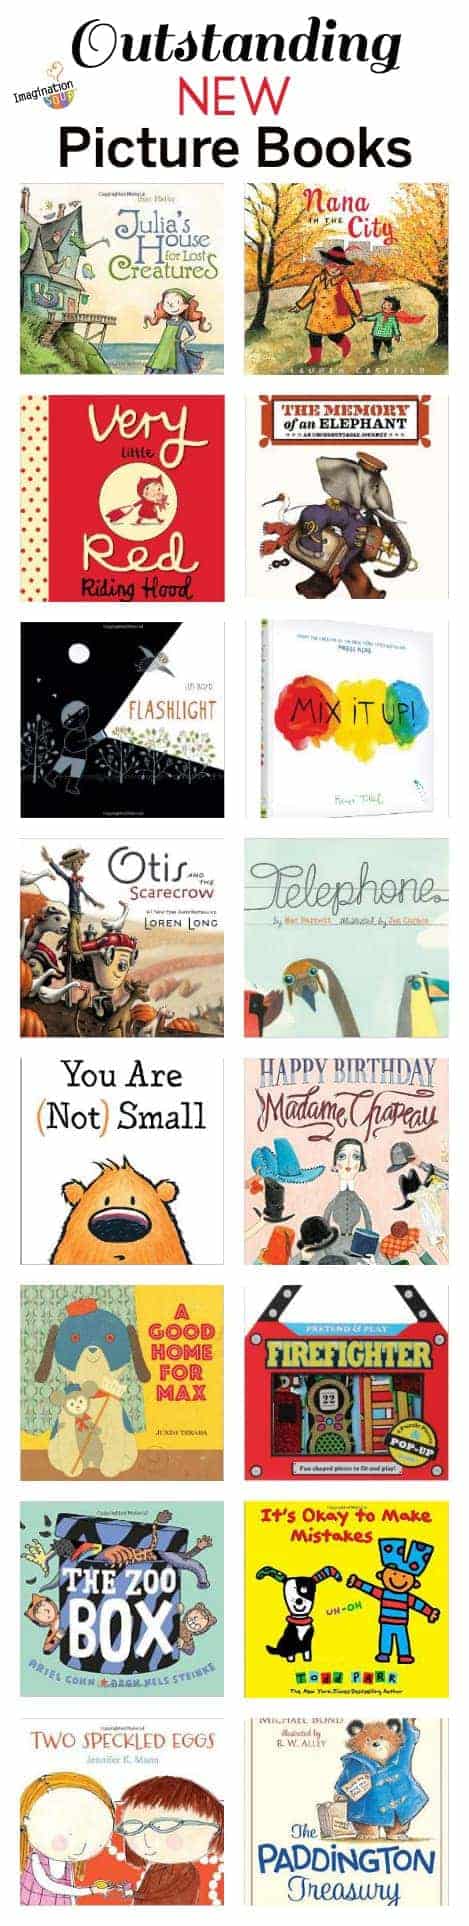 outstanding new picture books, summer 2014